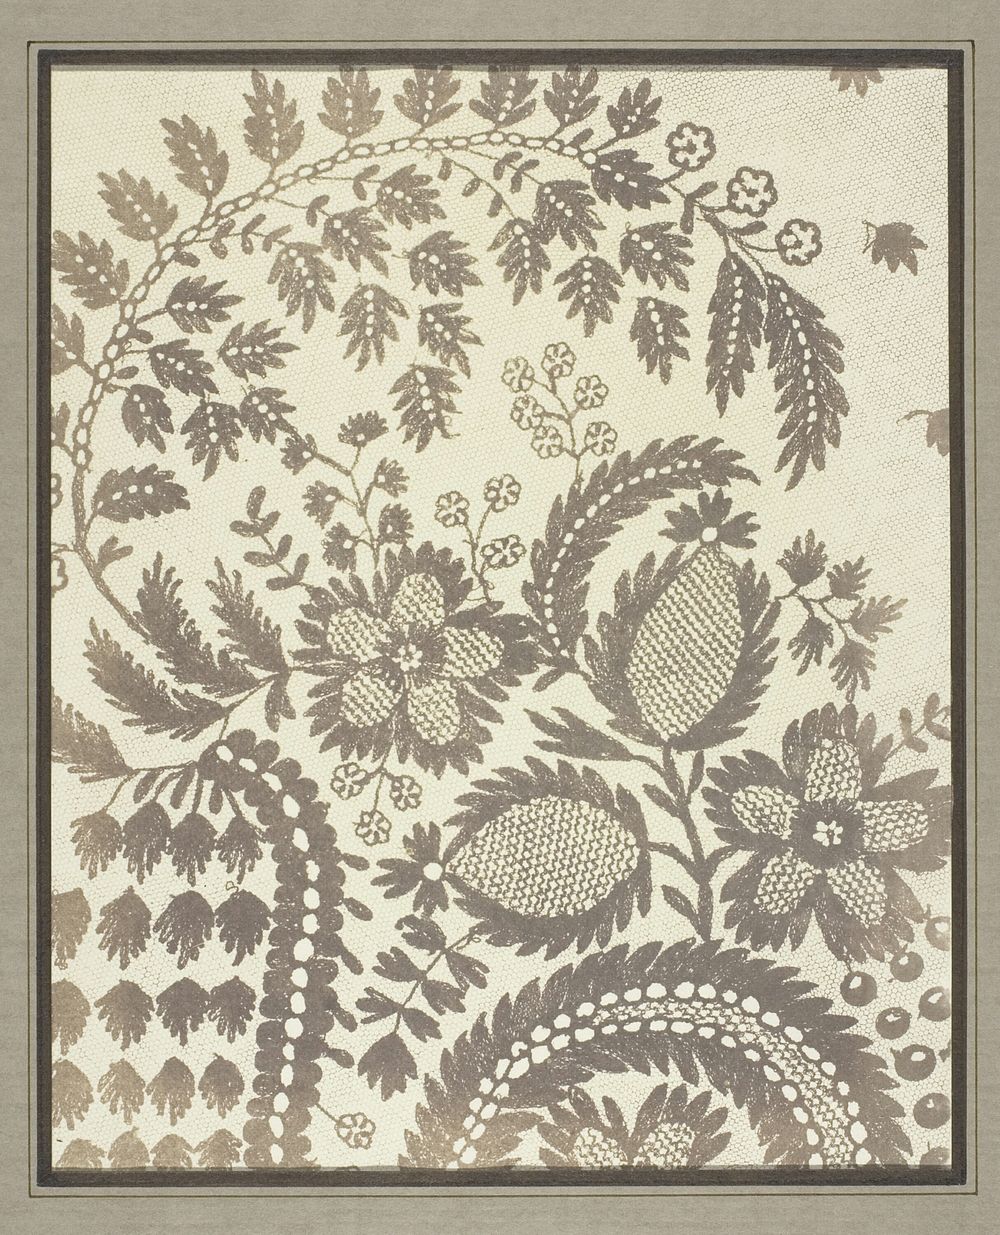 Lace by William Henry Fox Talbot